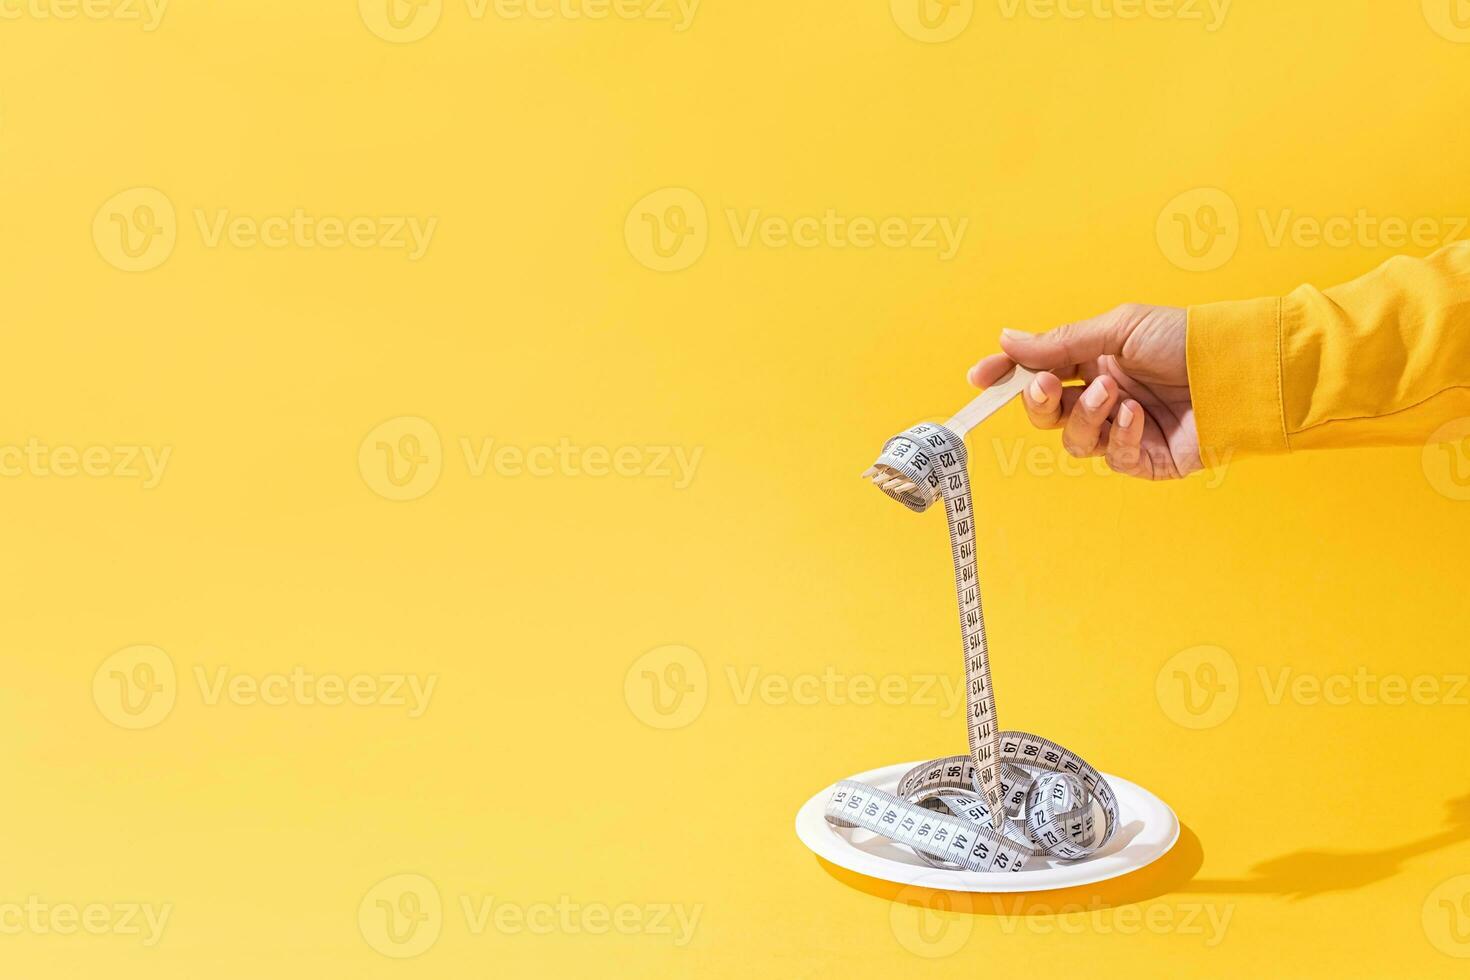 woman hands holding colorful measuring tape front view on plate on bright yellow background photo